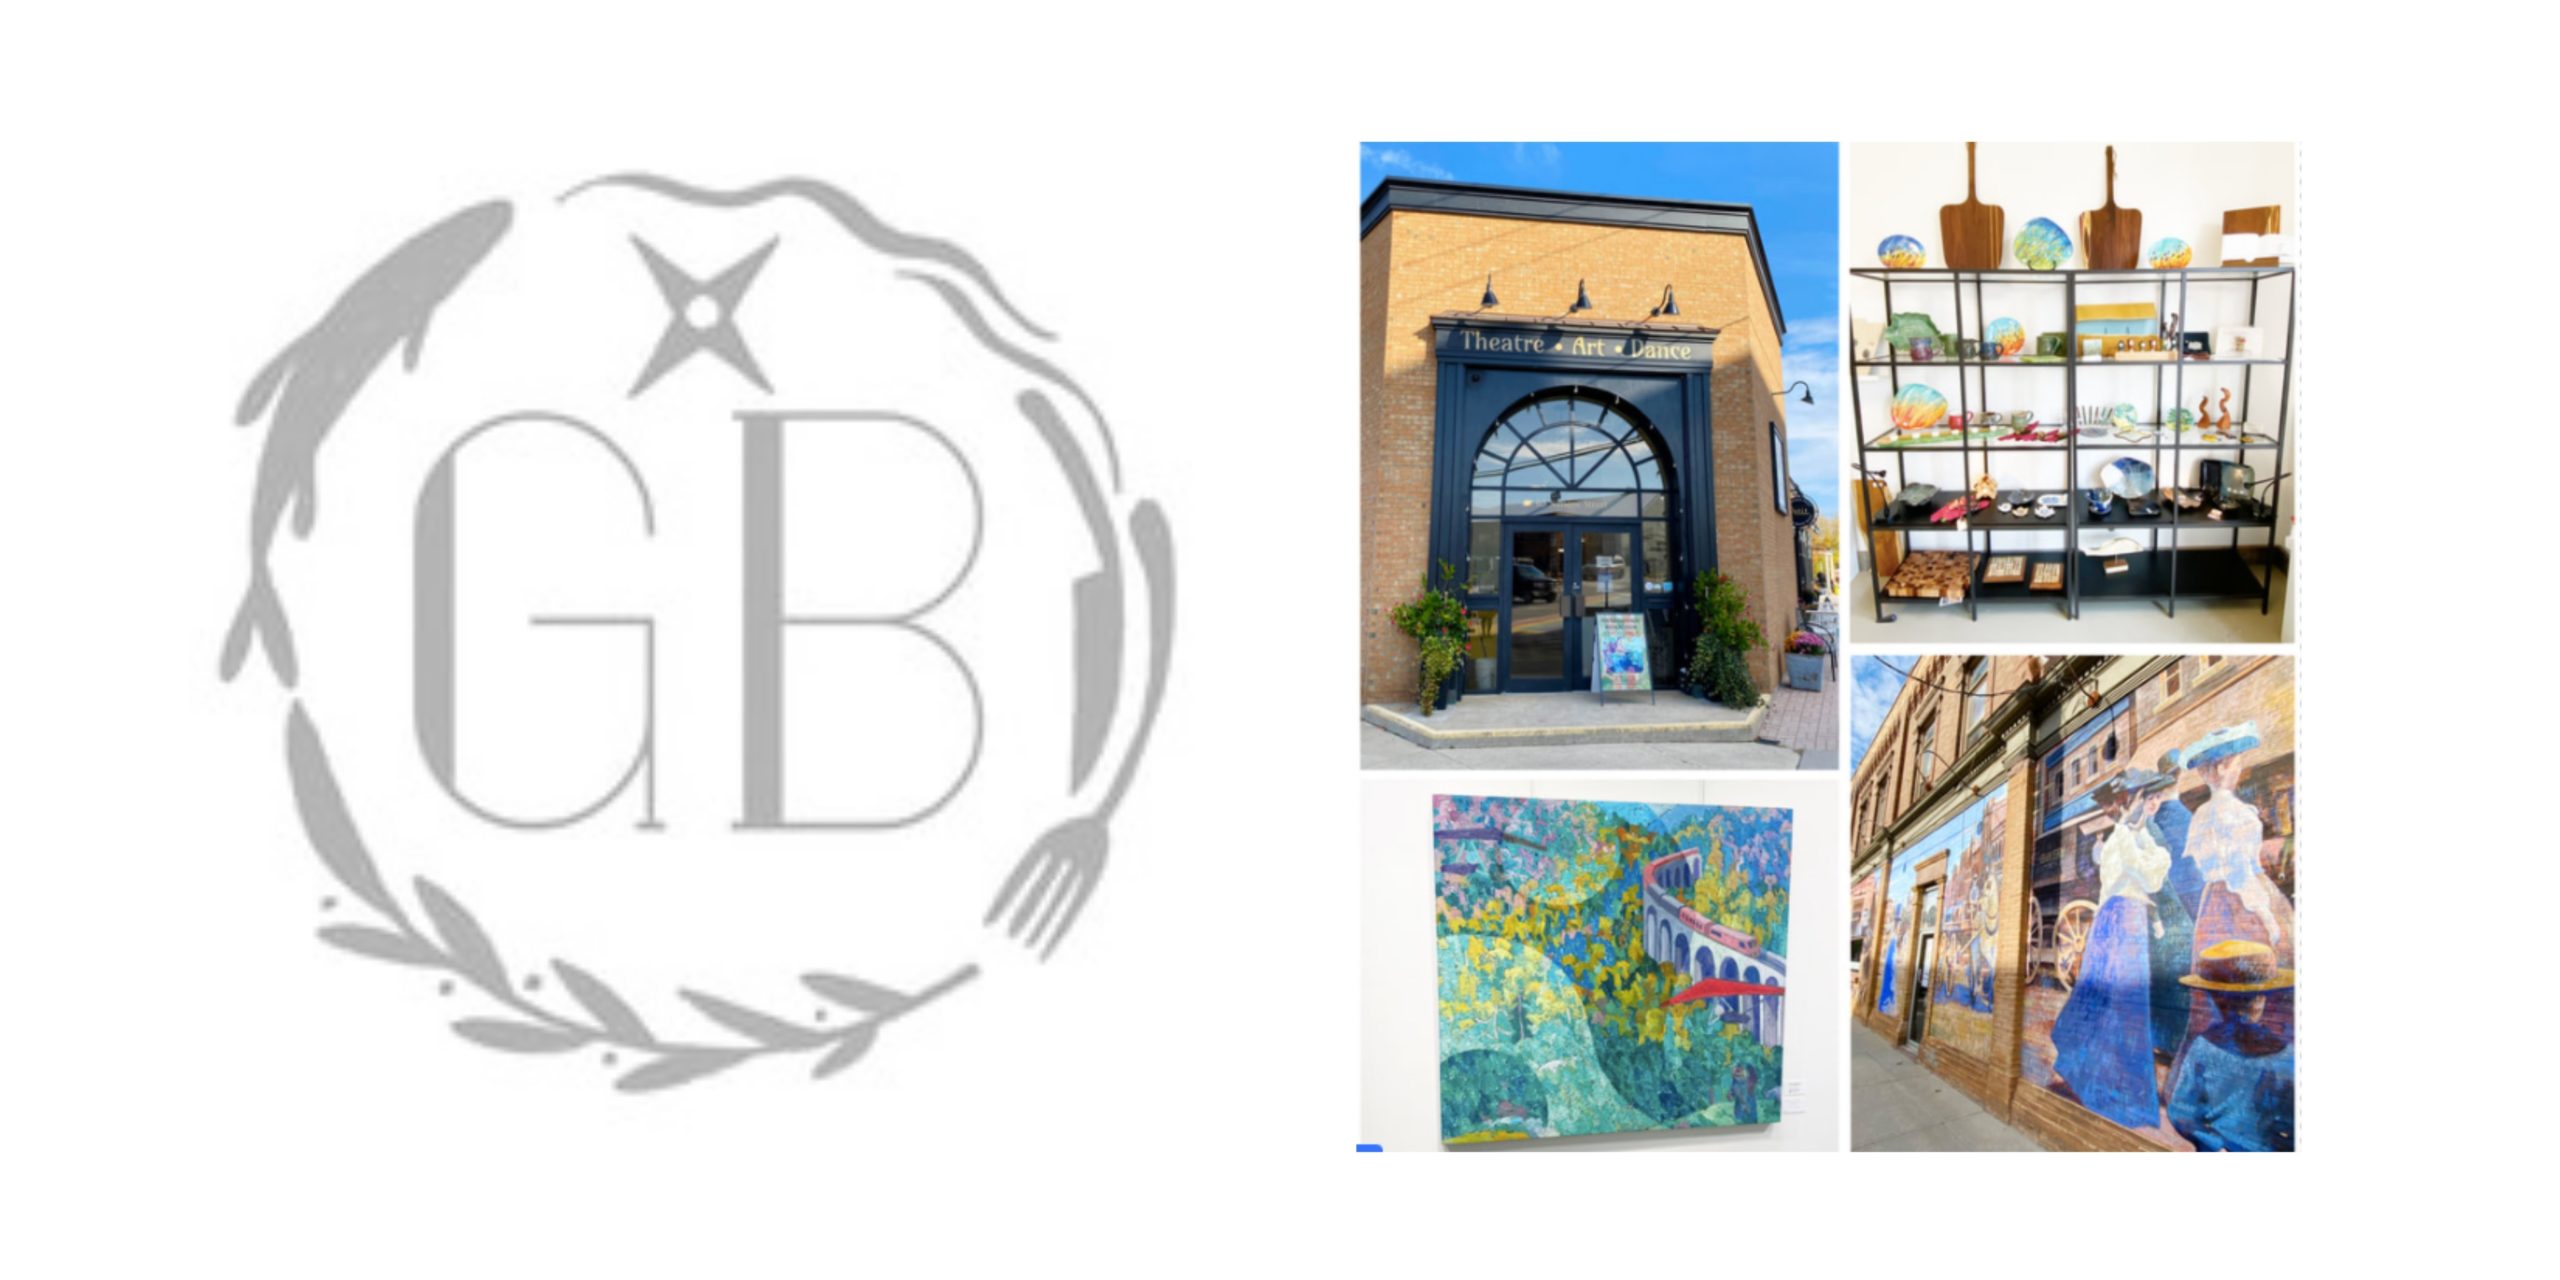 GB logo and 4 iamges of the simcoe street building, art shop shelves, a painting and exterior wall mural.